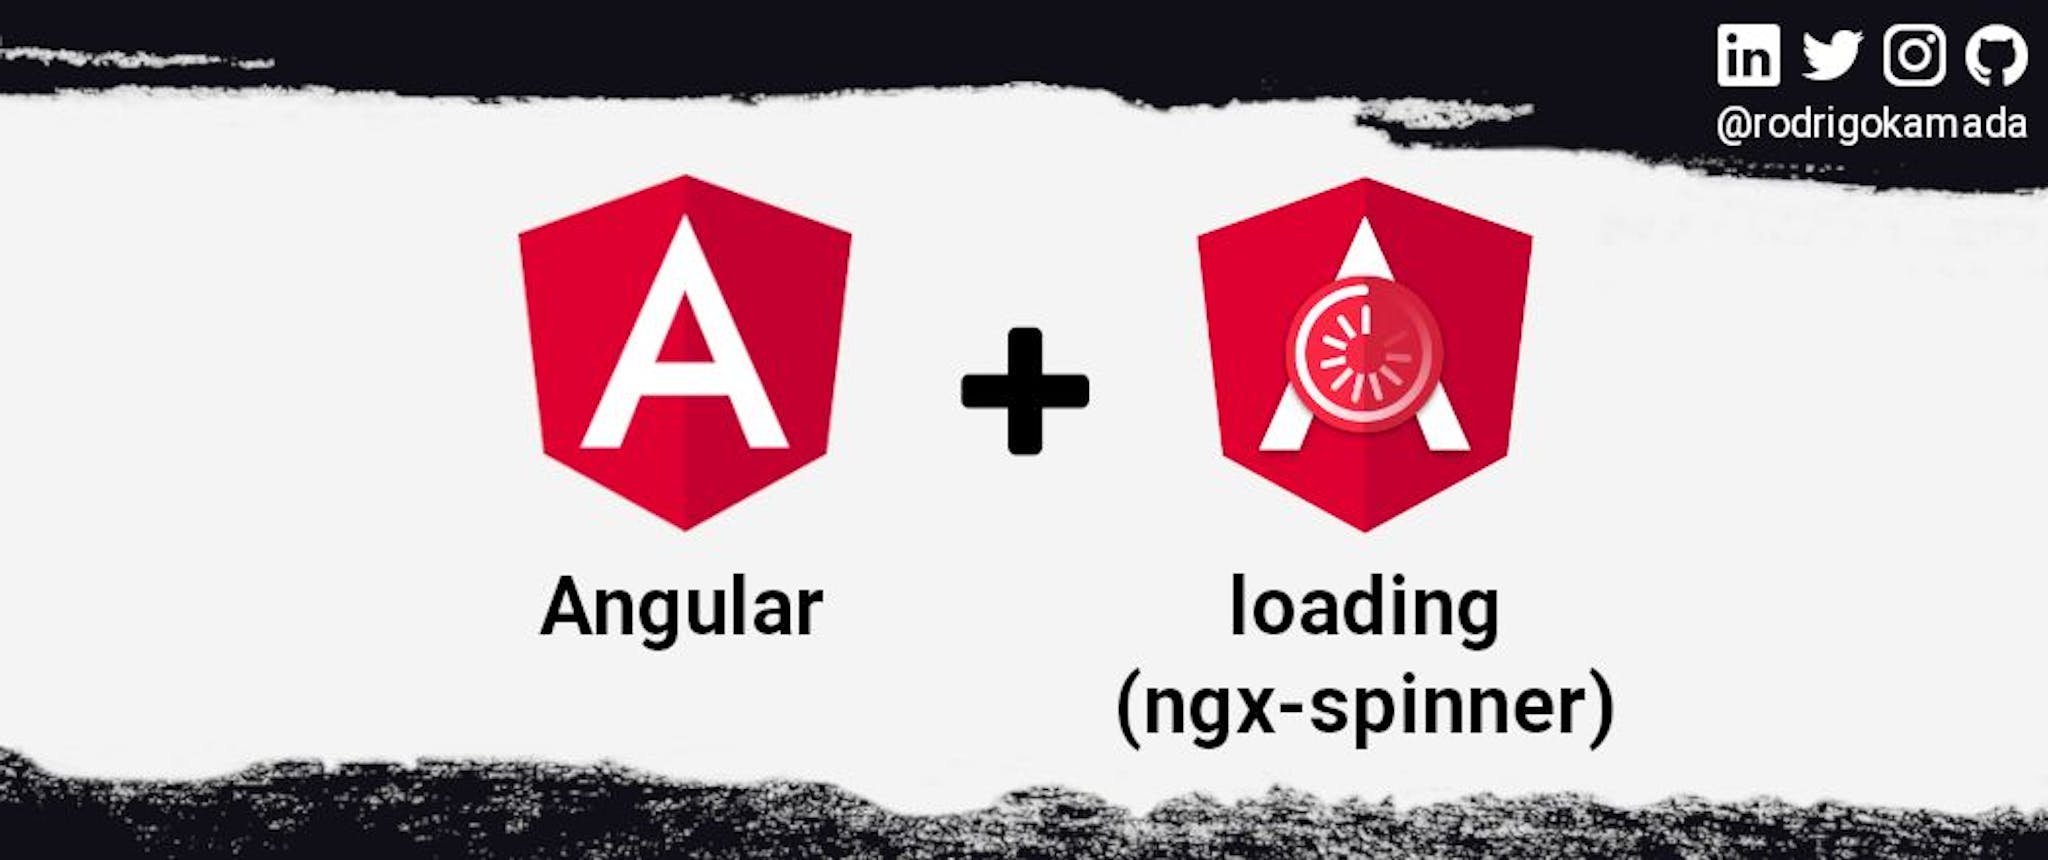 featured image - Adding the loading component (spinner) to an Angular application